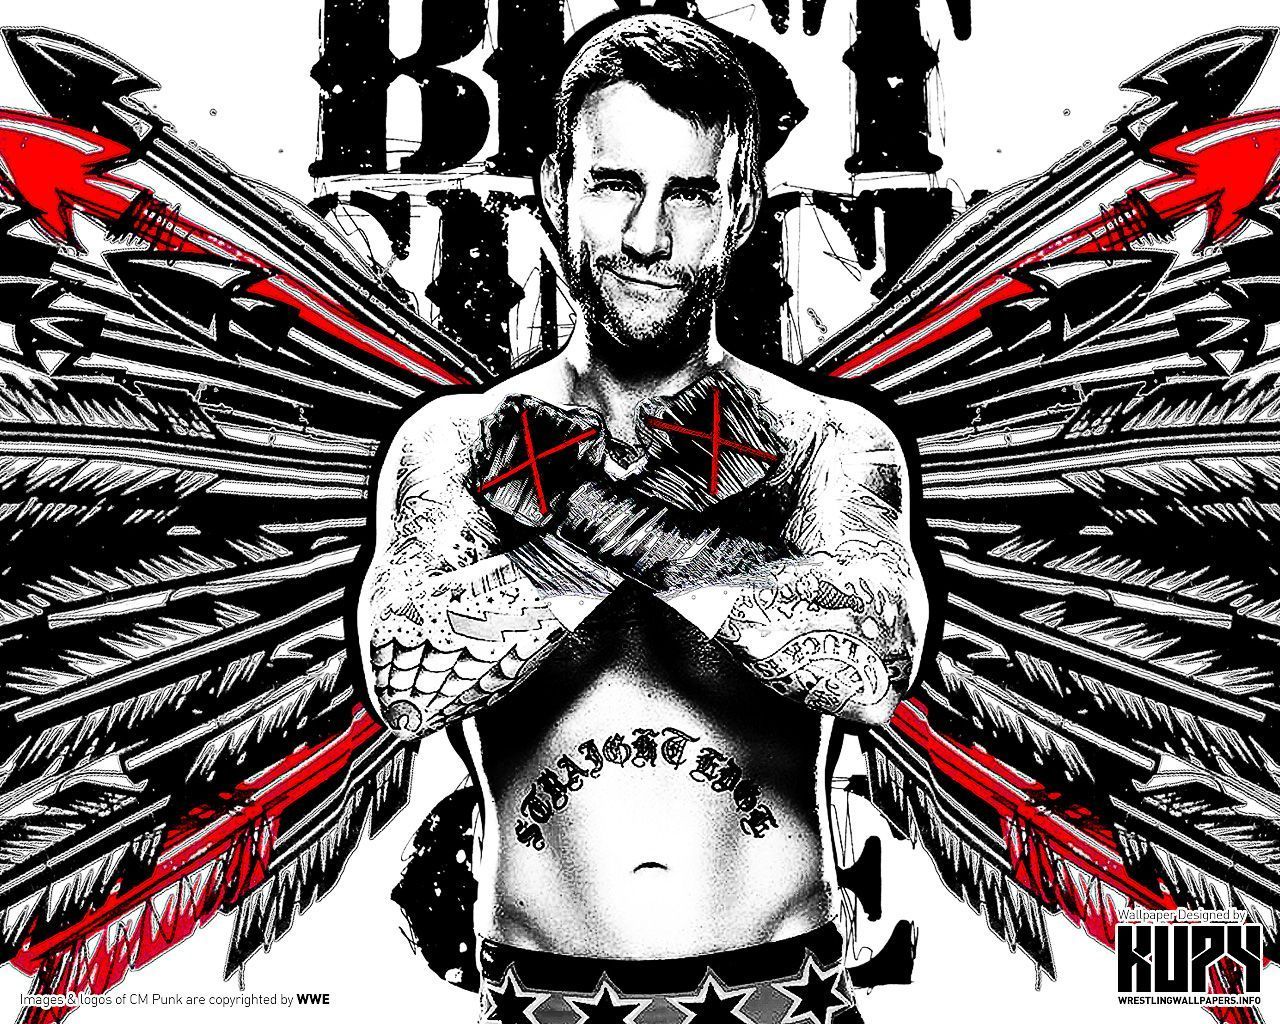 Best 10 CM PUNK WALLPAPER Pictures - Image Gallery